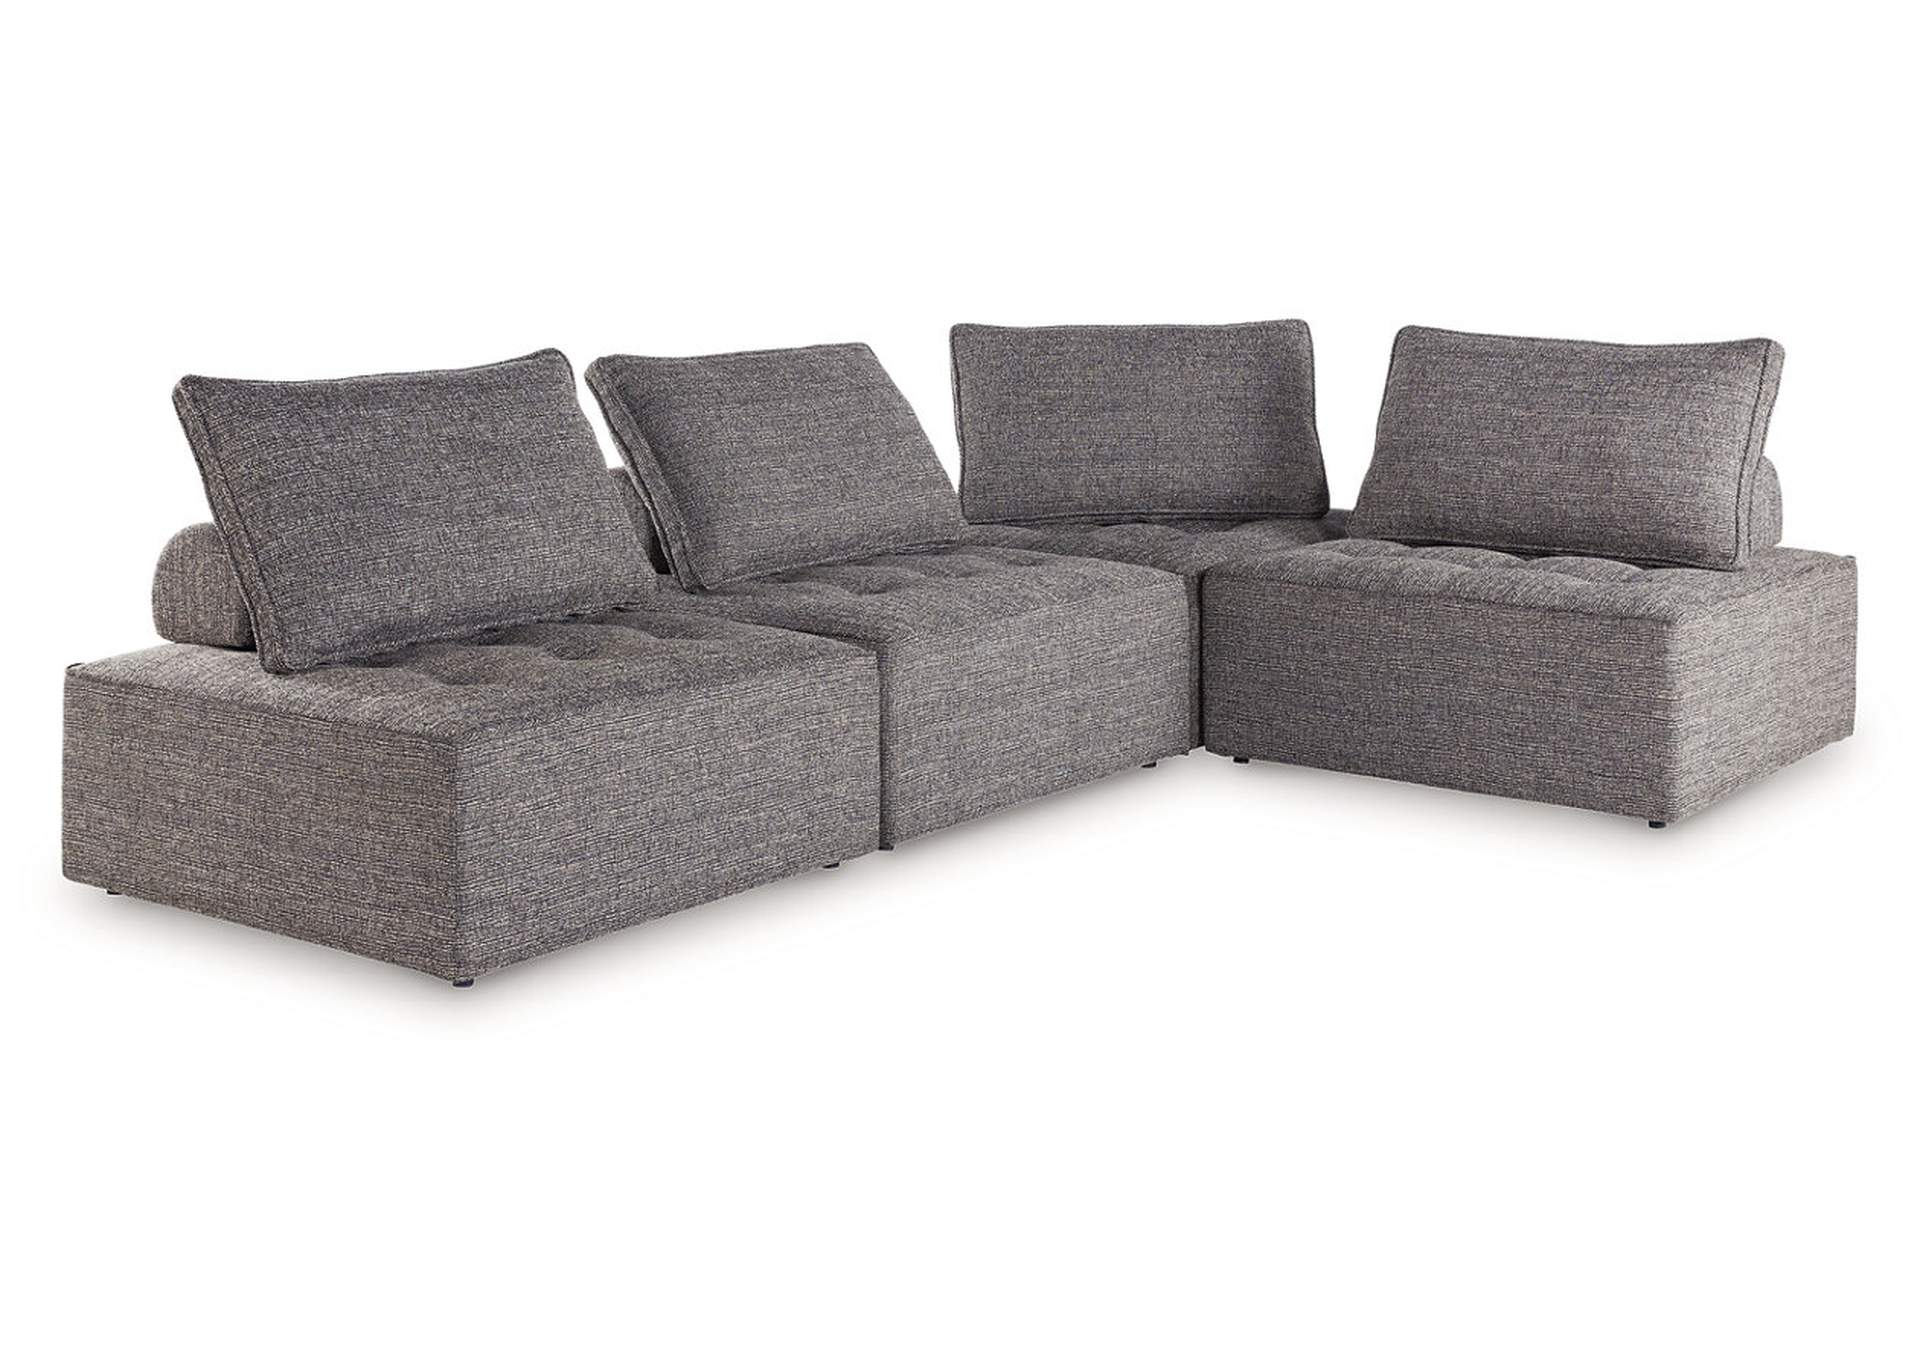 Bree Zee 4-Piece Outdoor Sectional,Outdoor By Ashley